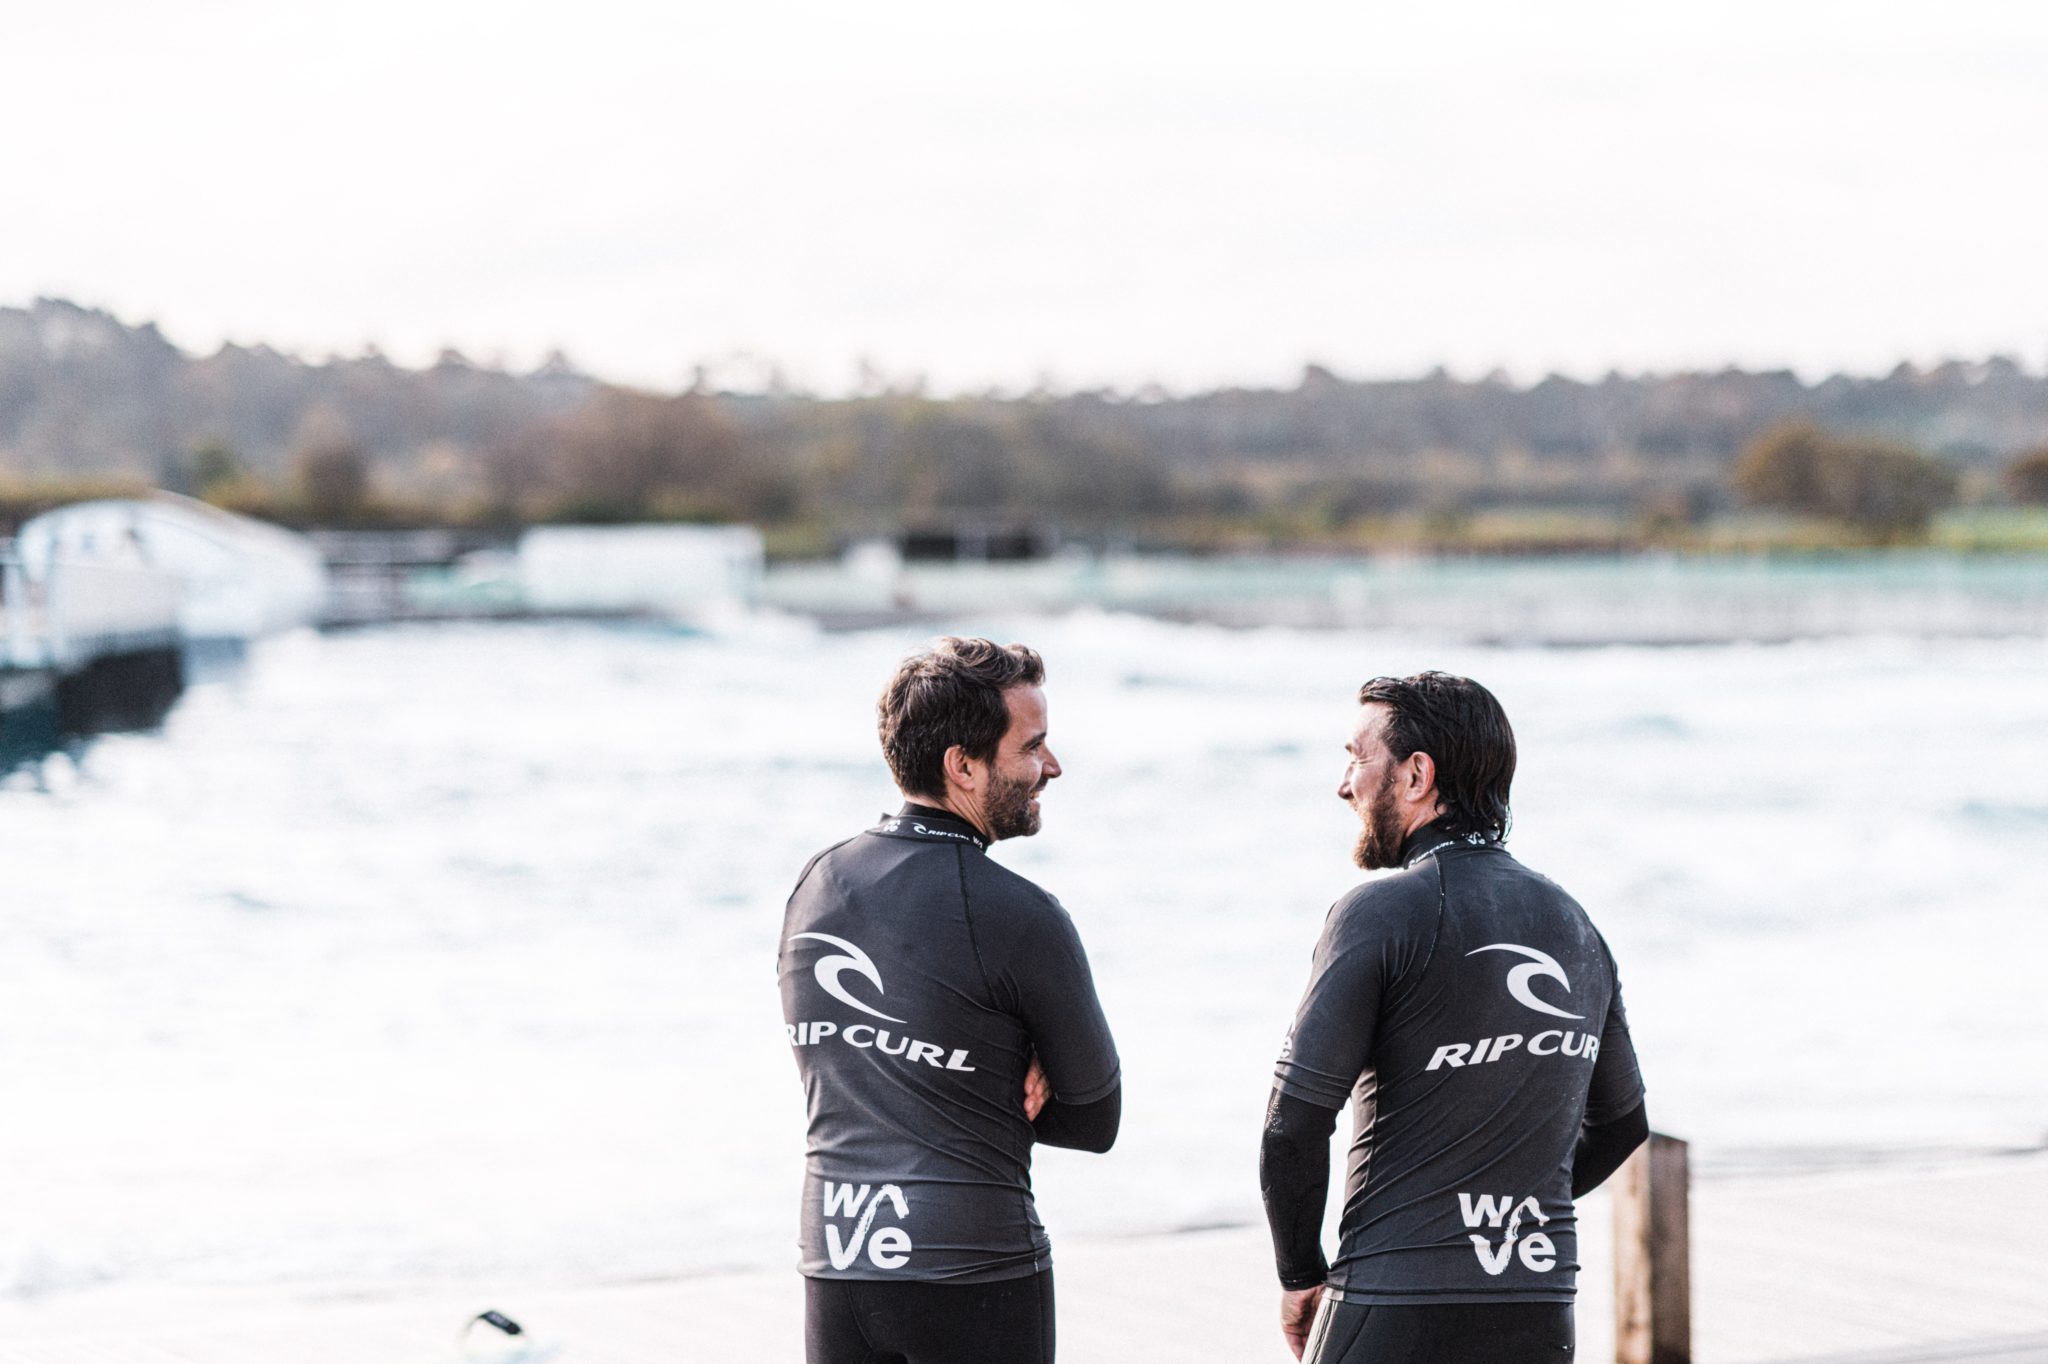 Two adult surfers having a chat after their surf session at The Wave near Bristol